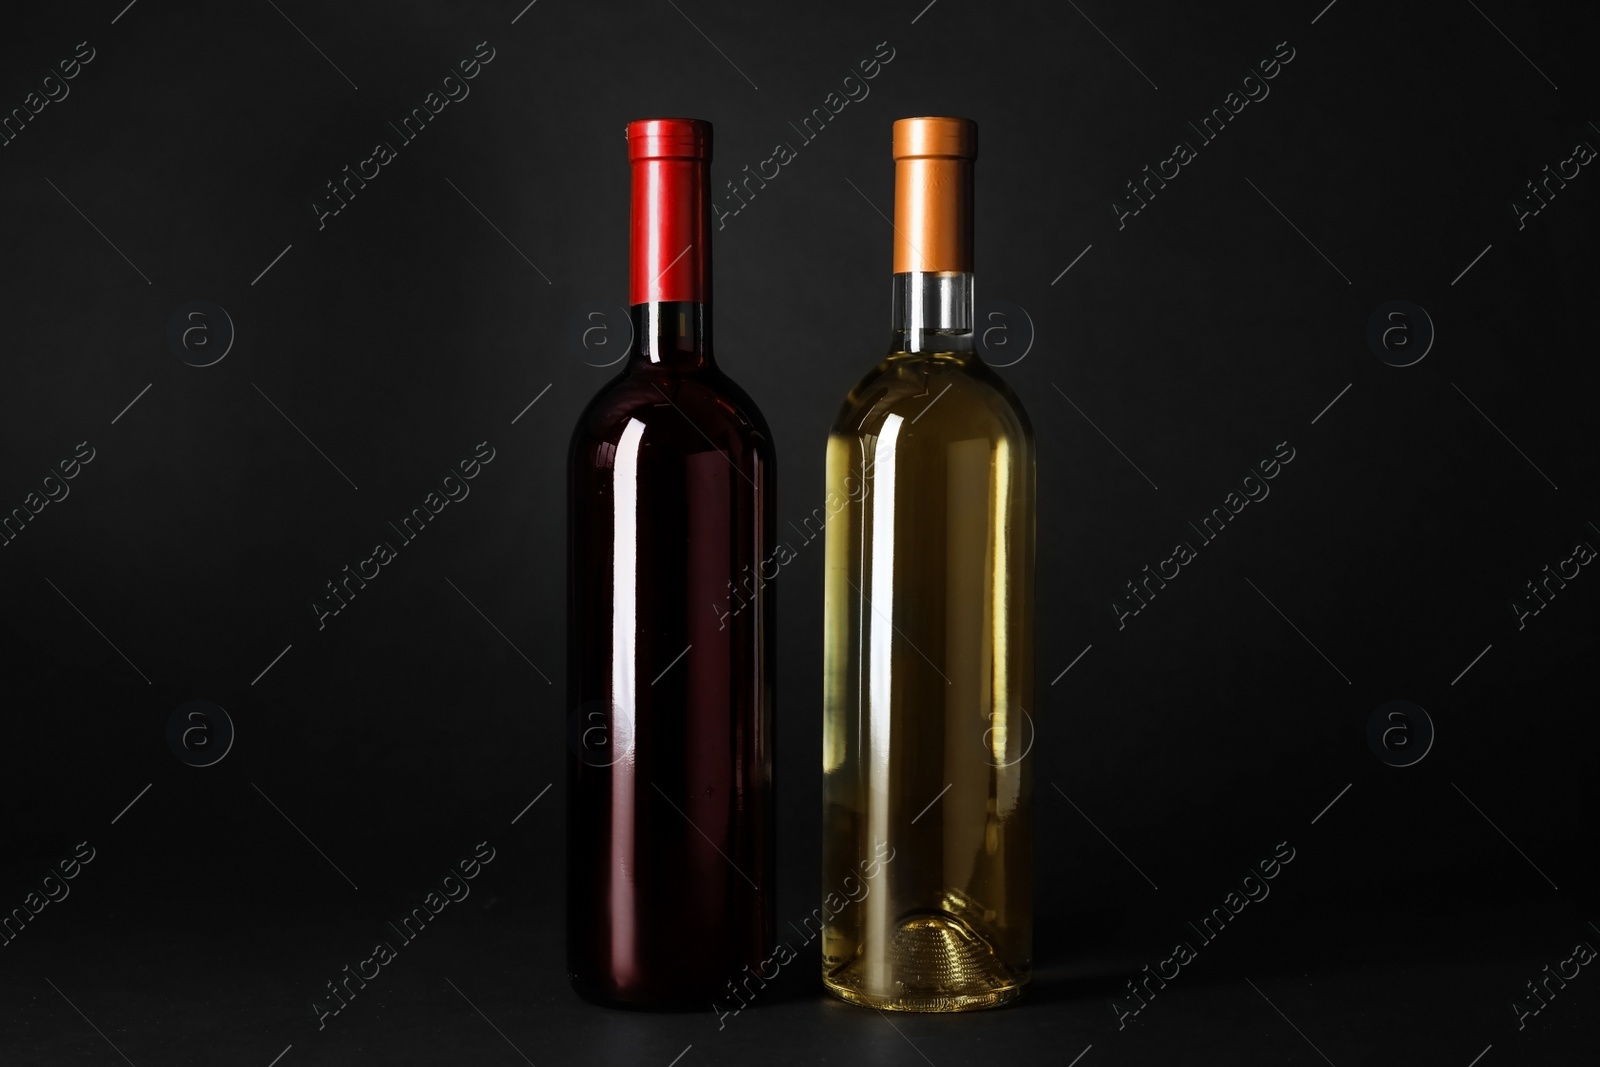 Photo of Bottles of expensive red and white wines on dark background